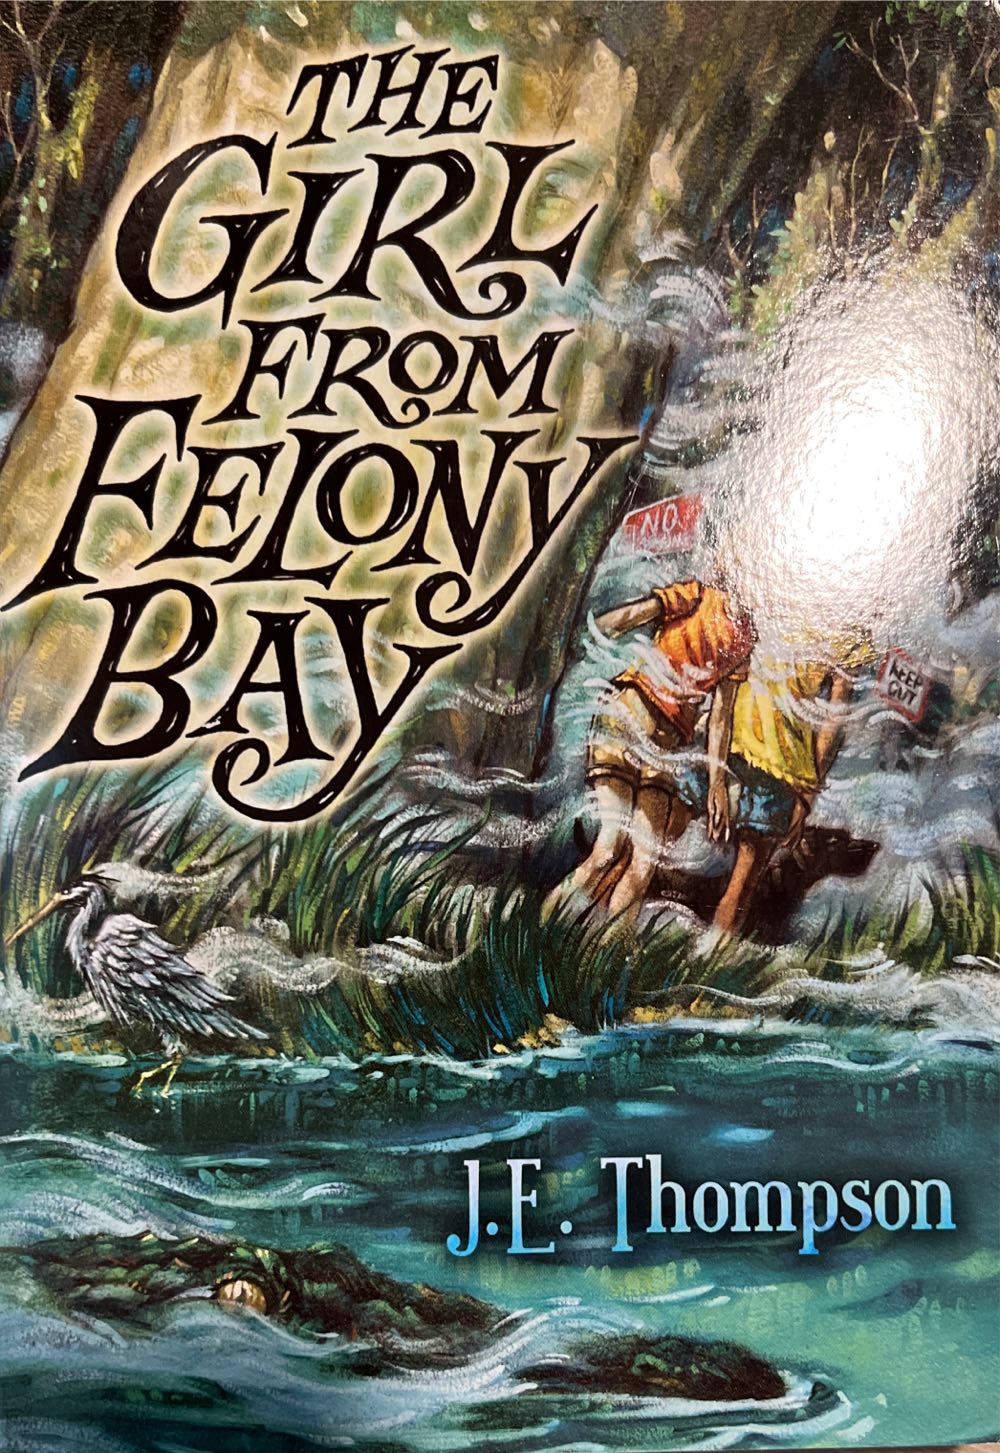 Girl From Felony Bay, The - J.E Thompson (- Paperback) book collectible [Barcode 9781338157833] - Main Image 3